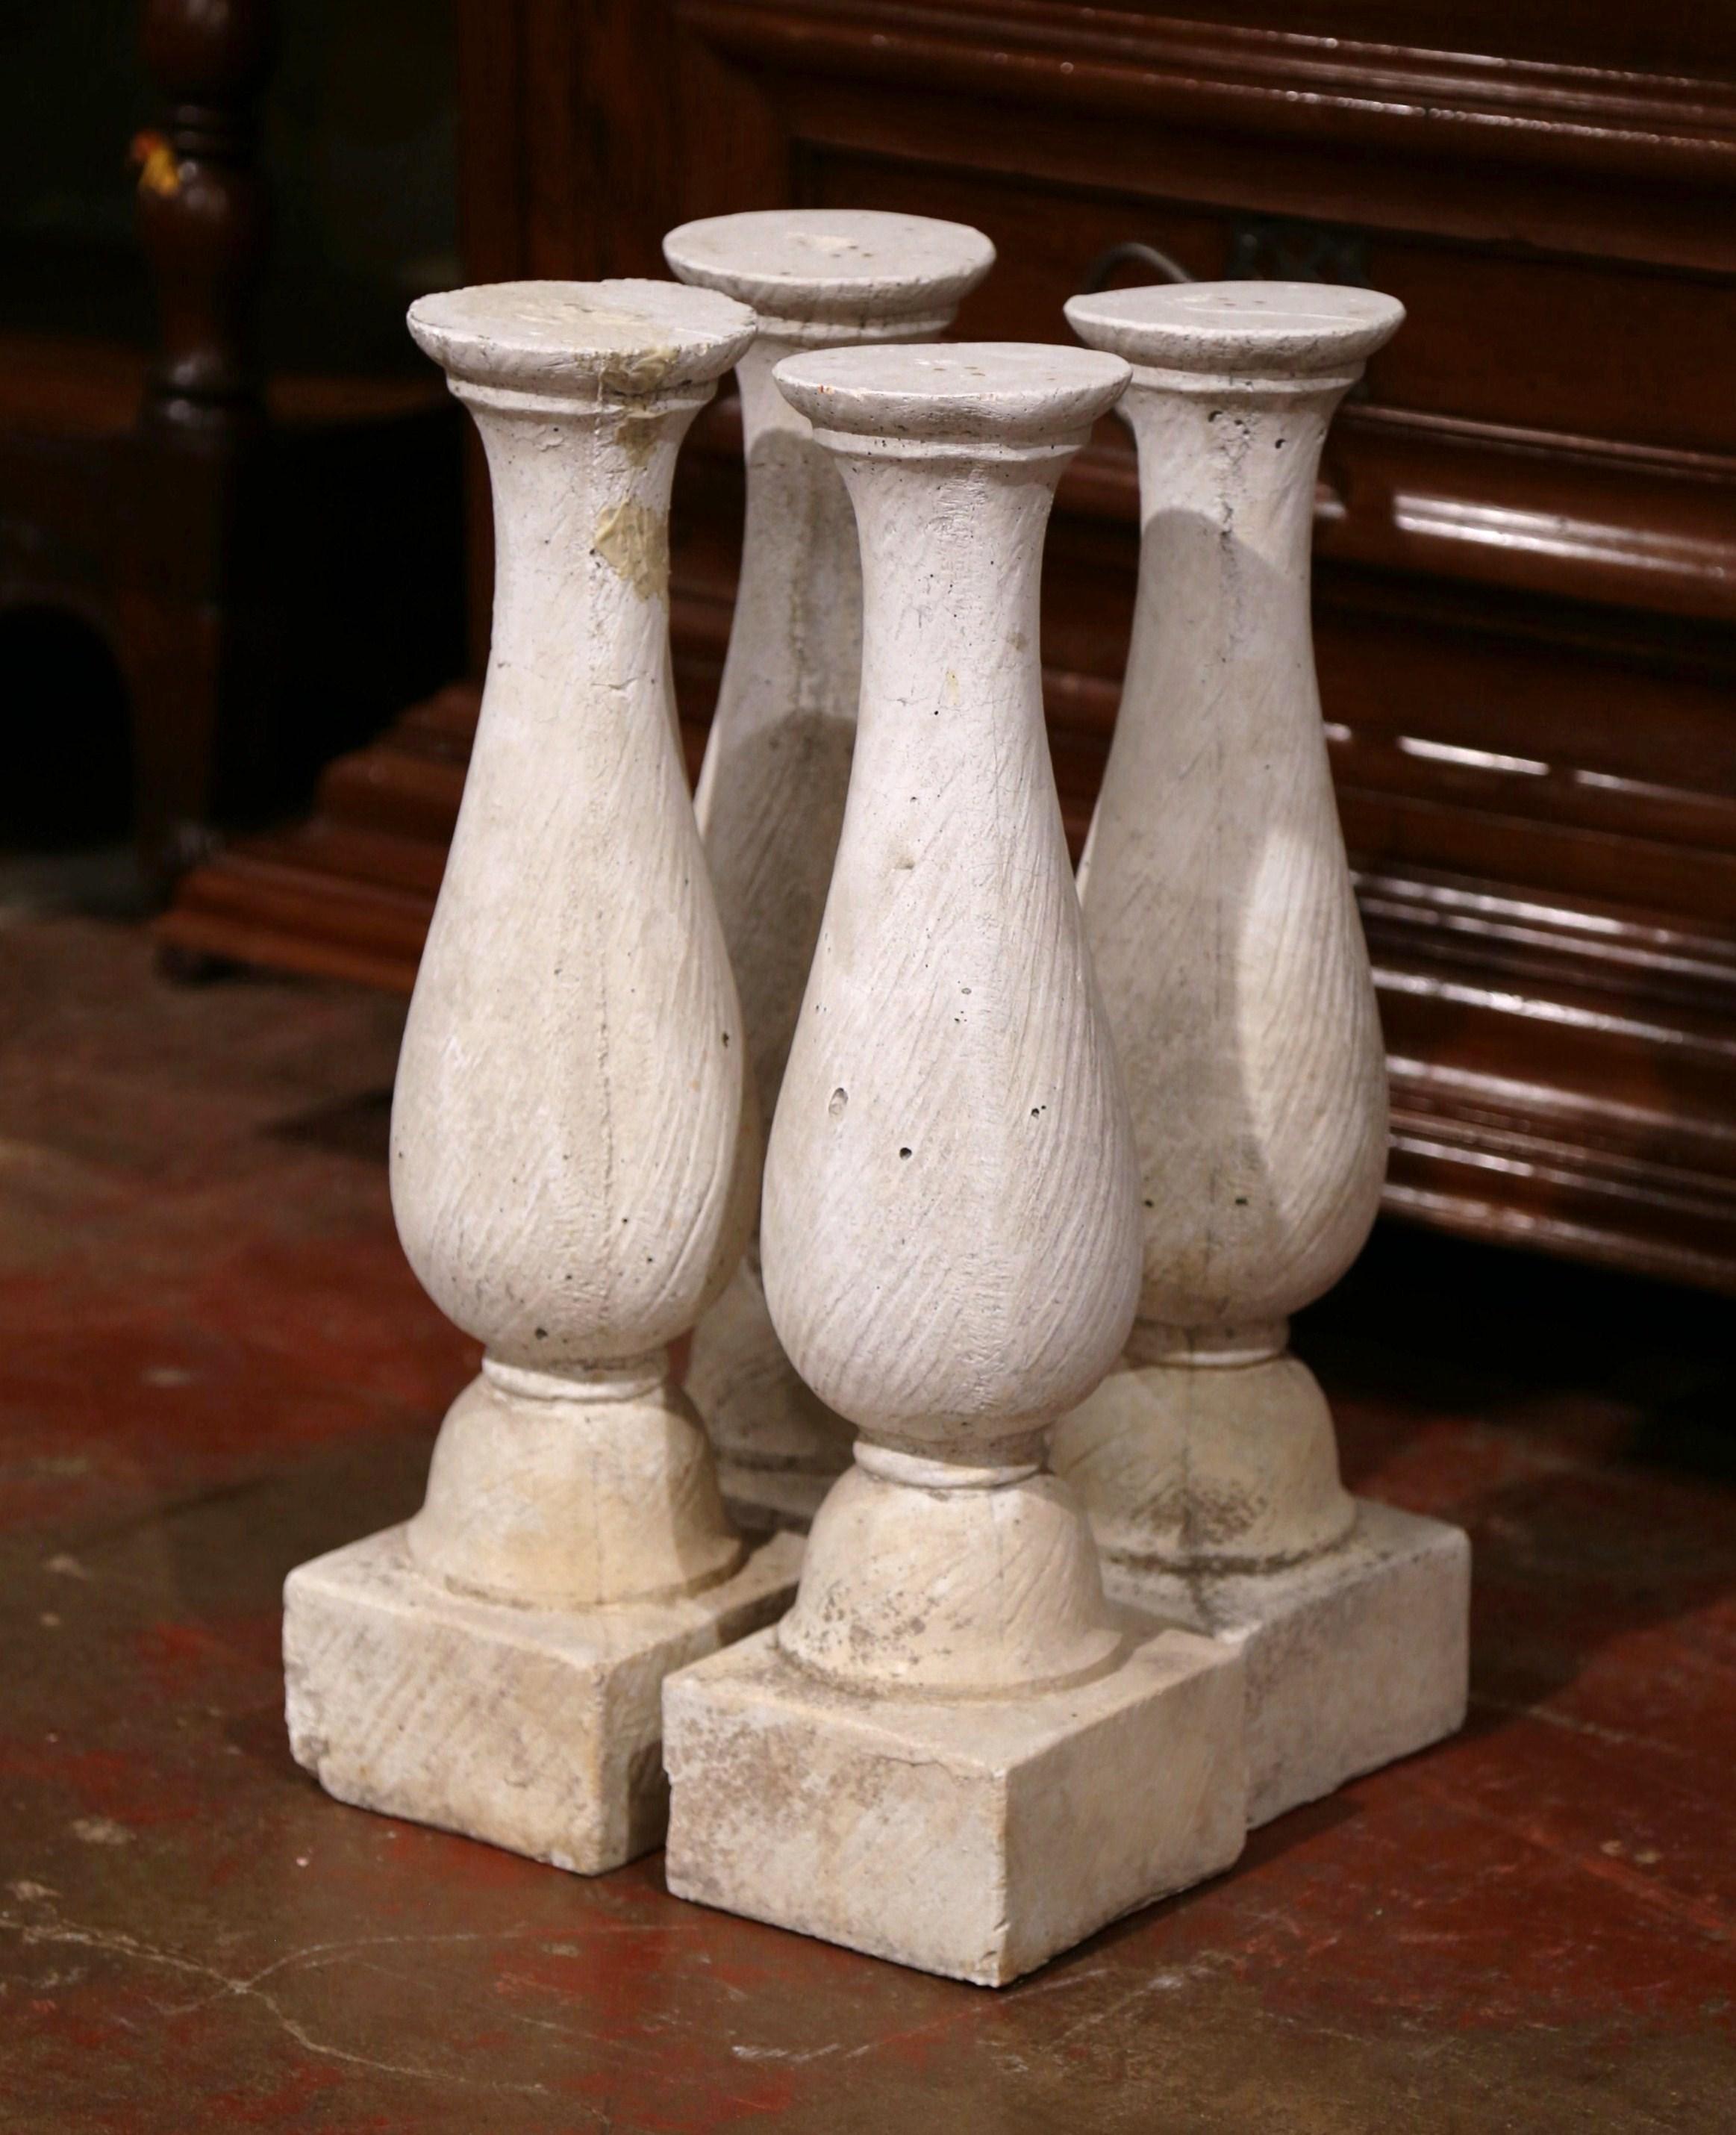 These antique balusters were created in Southern France, circa 1880; made of cast stone, each piece is hand-carved with the original patinated finish. All four pieces are in good condition commensurate with age and use. Convert these elegant